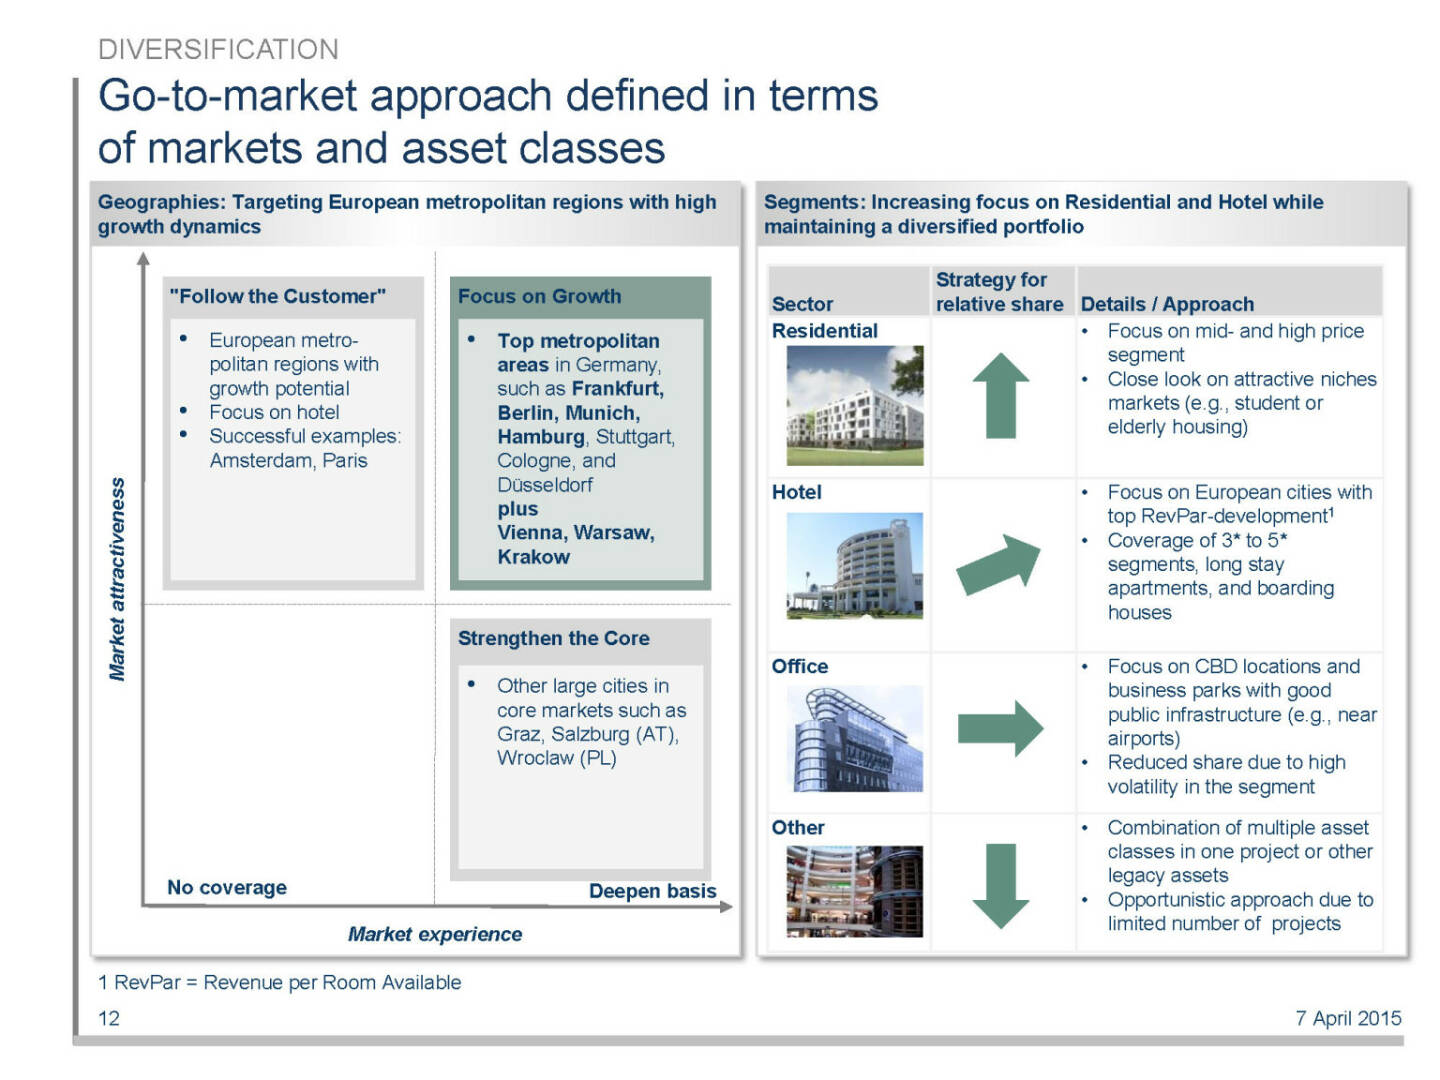 Go-to-market approach defined in terms of markets and asset classes